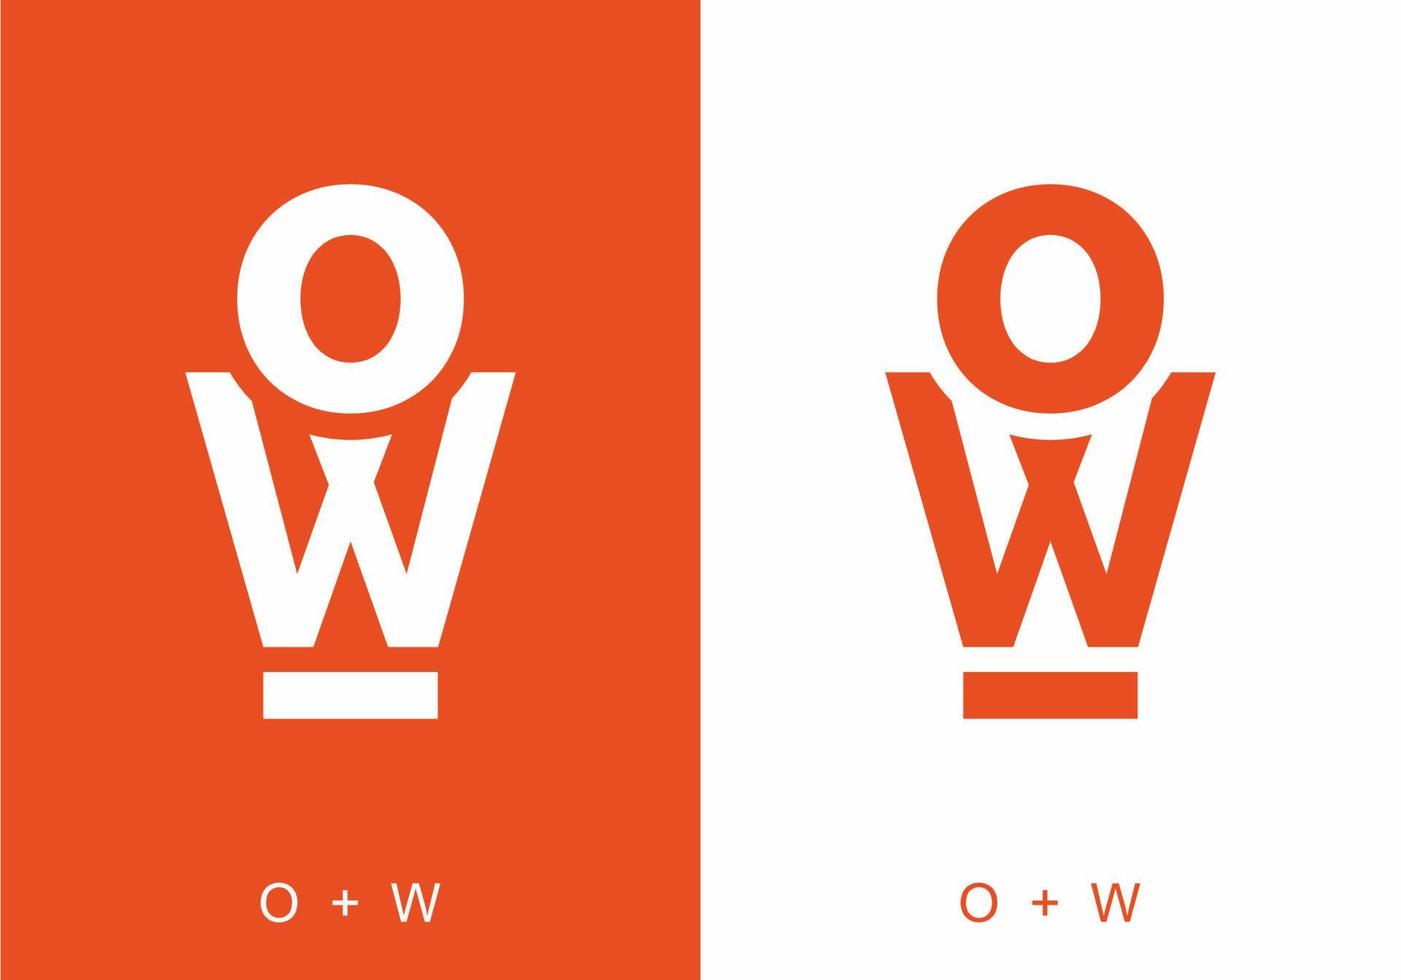 initial letter text of OW vector